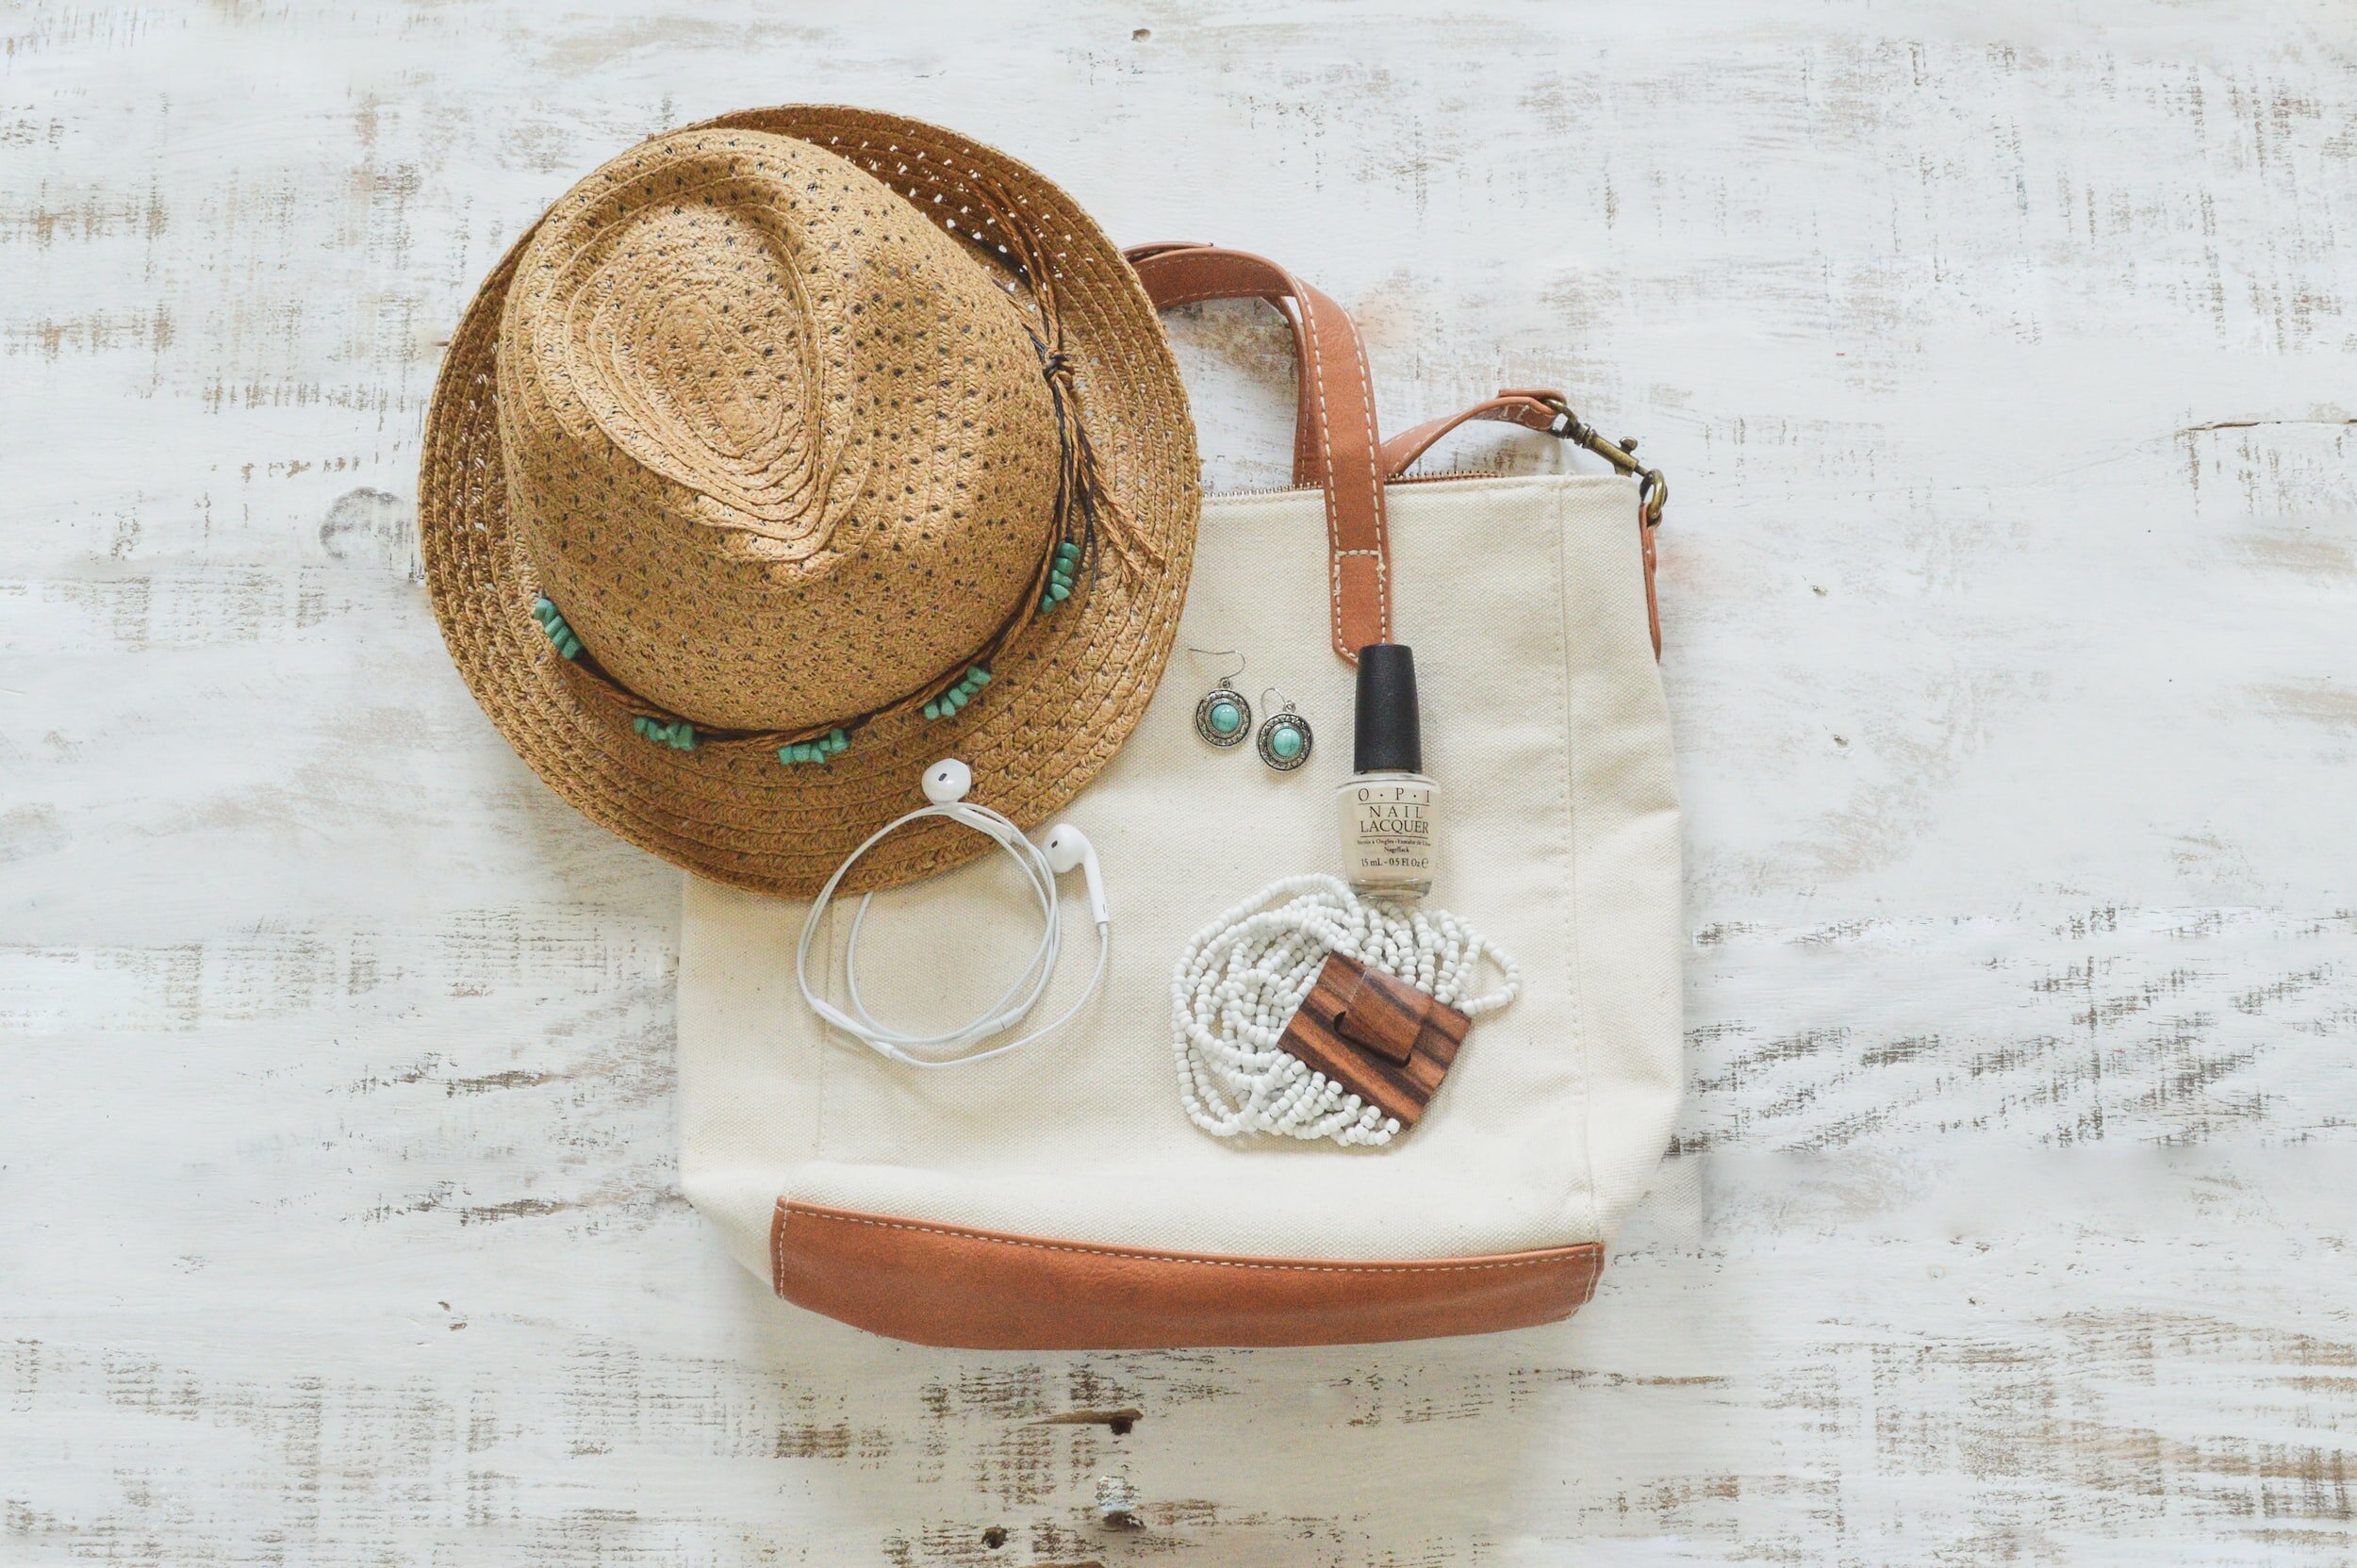 Carry-on packing checklist for your travels.